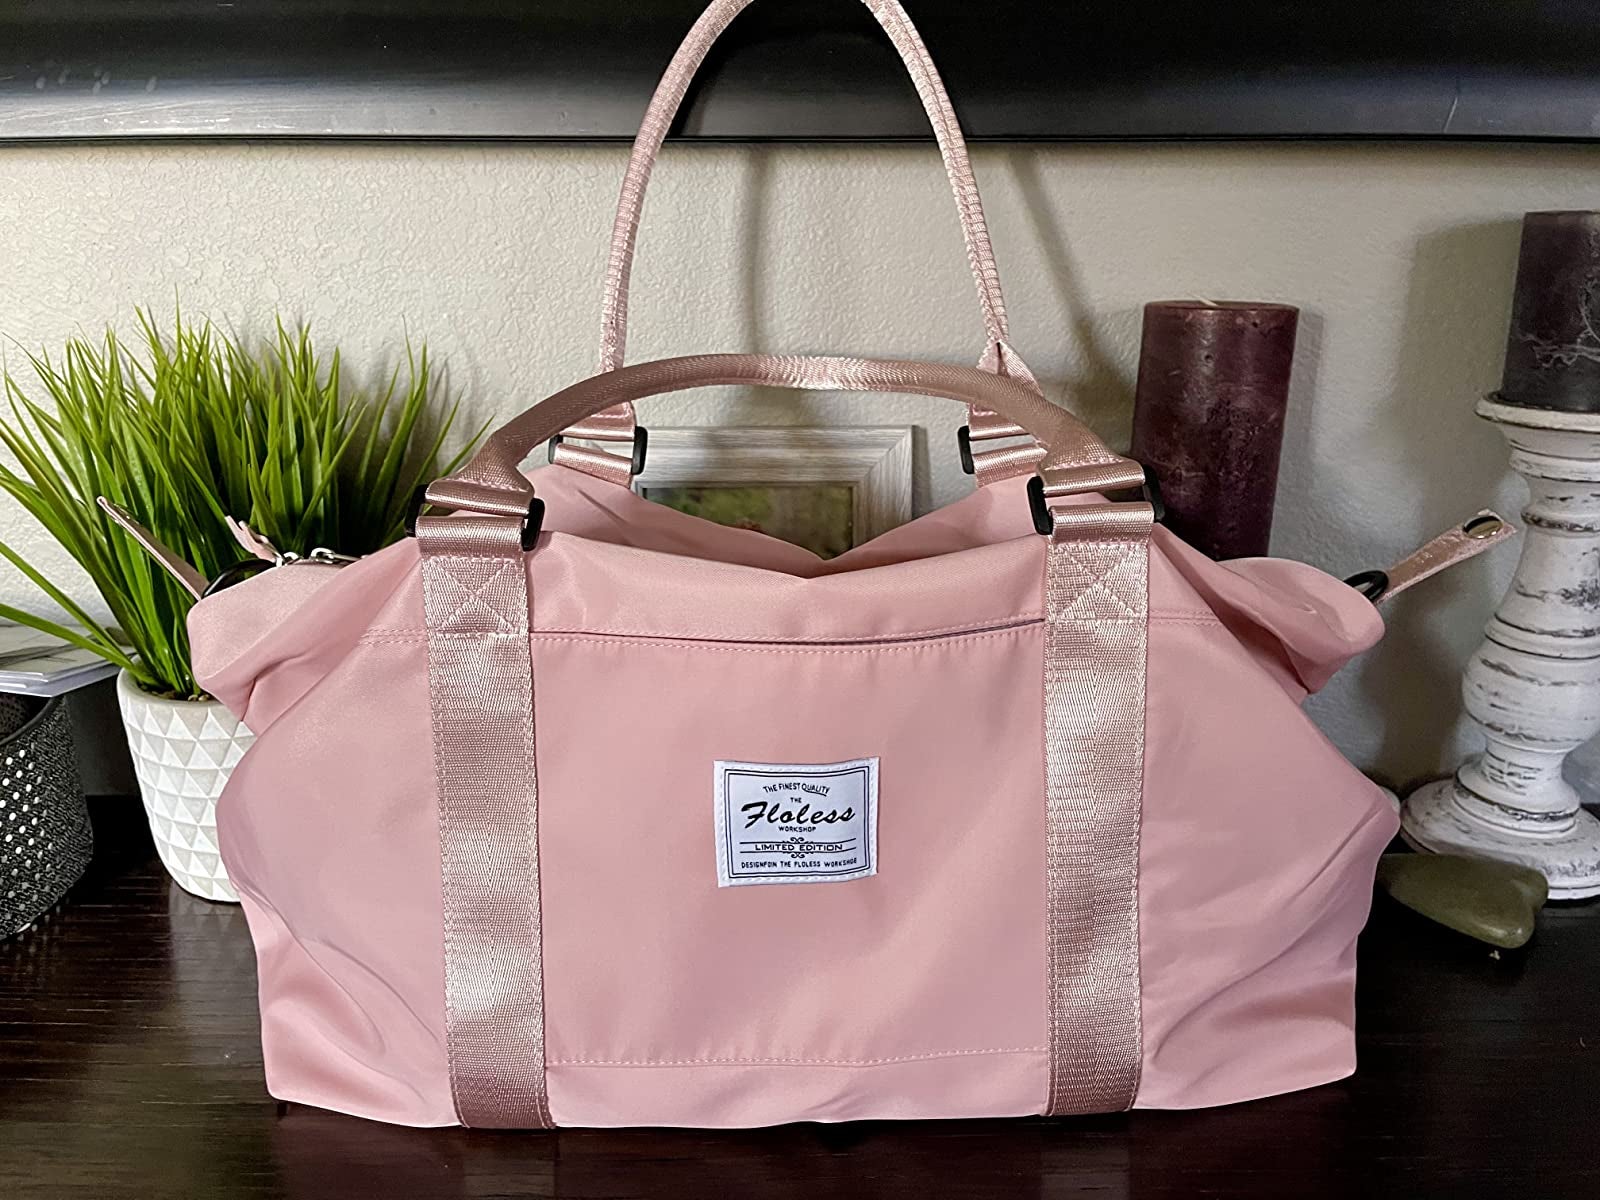 the pastel pink duffel bag with white logo tag